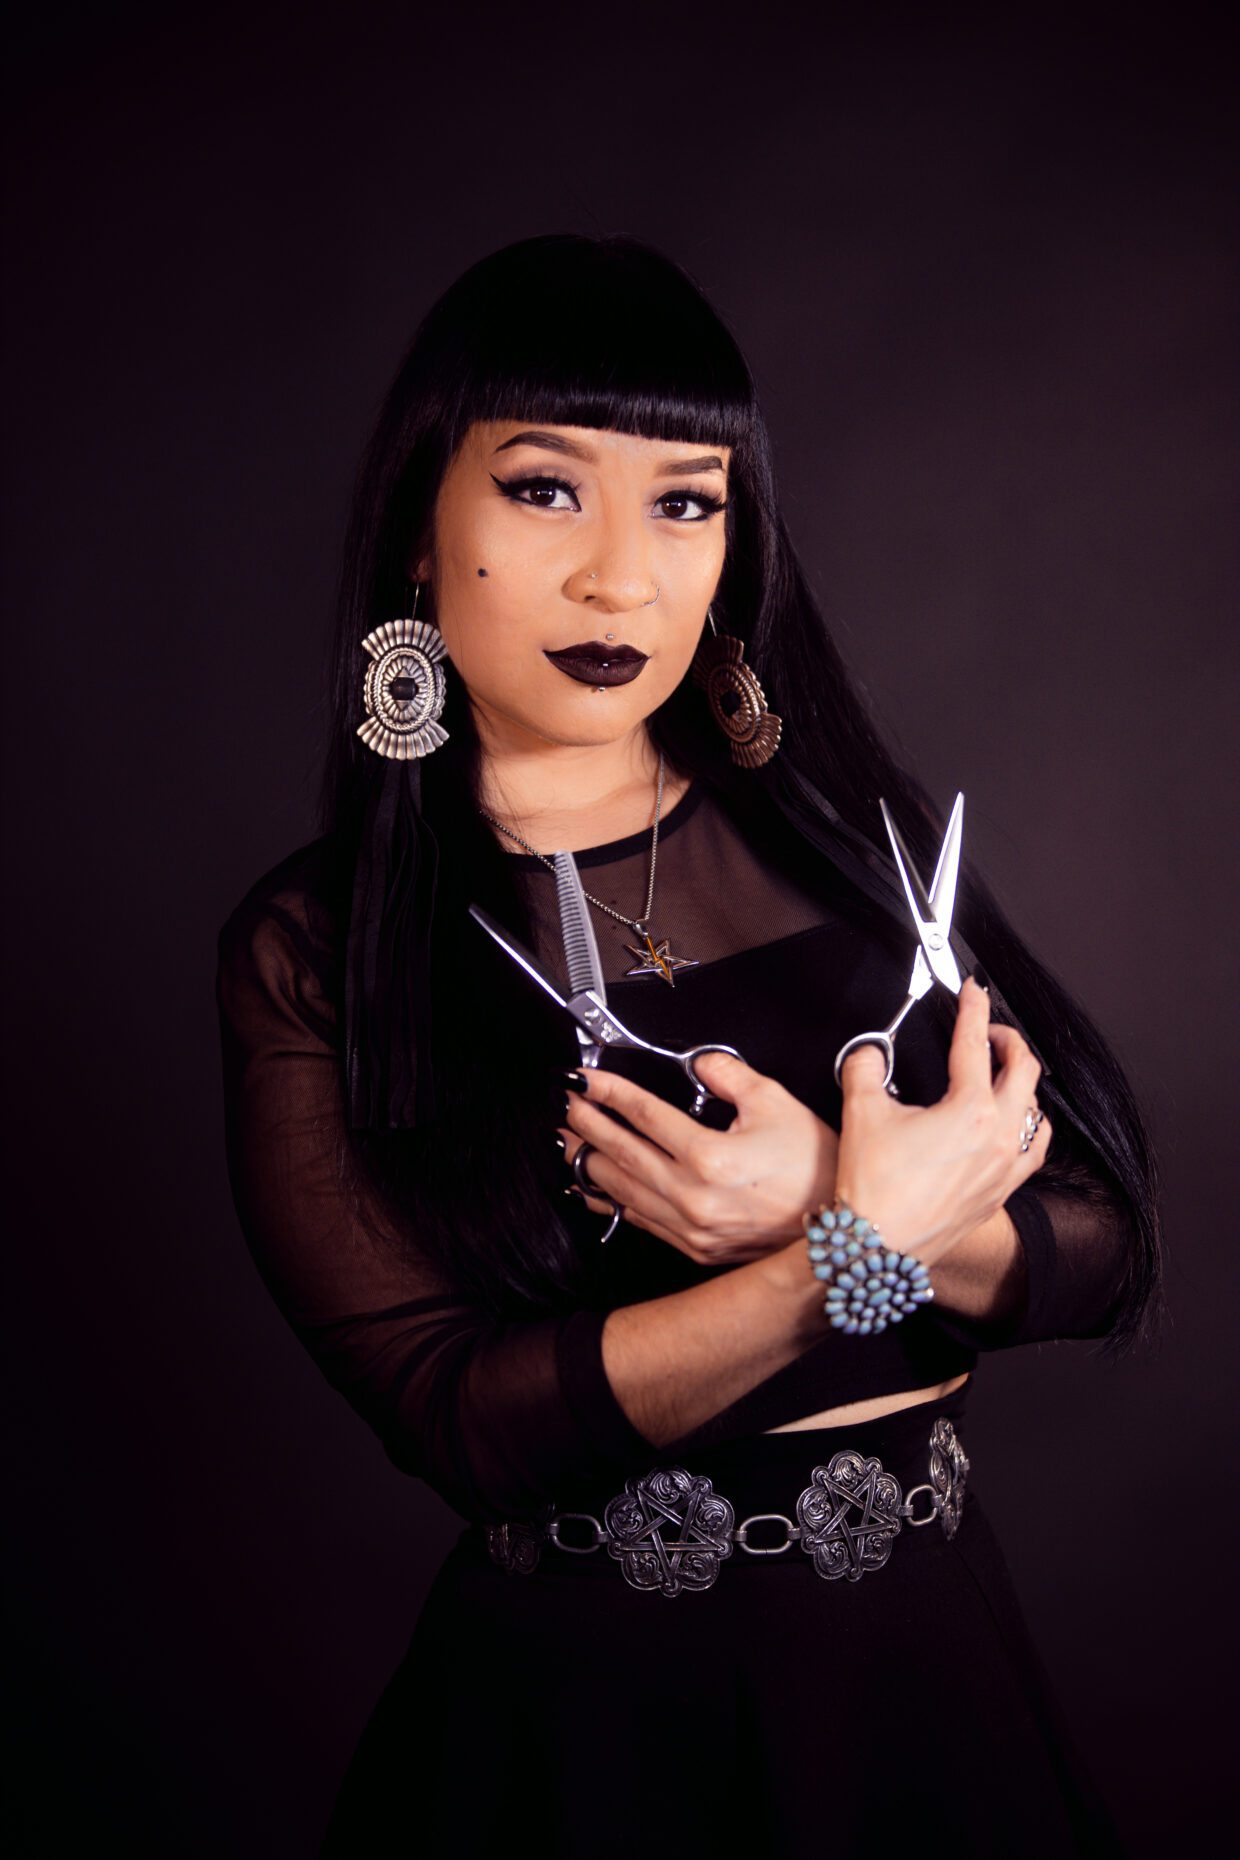 This shows Daphne Coriz, Indigenous hairstylist, posing with two pairs of hair cutting scissors.